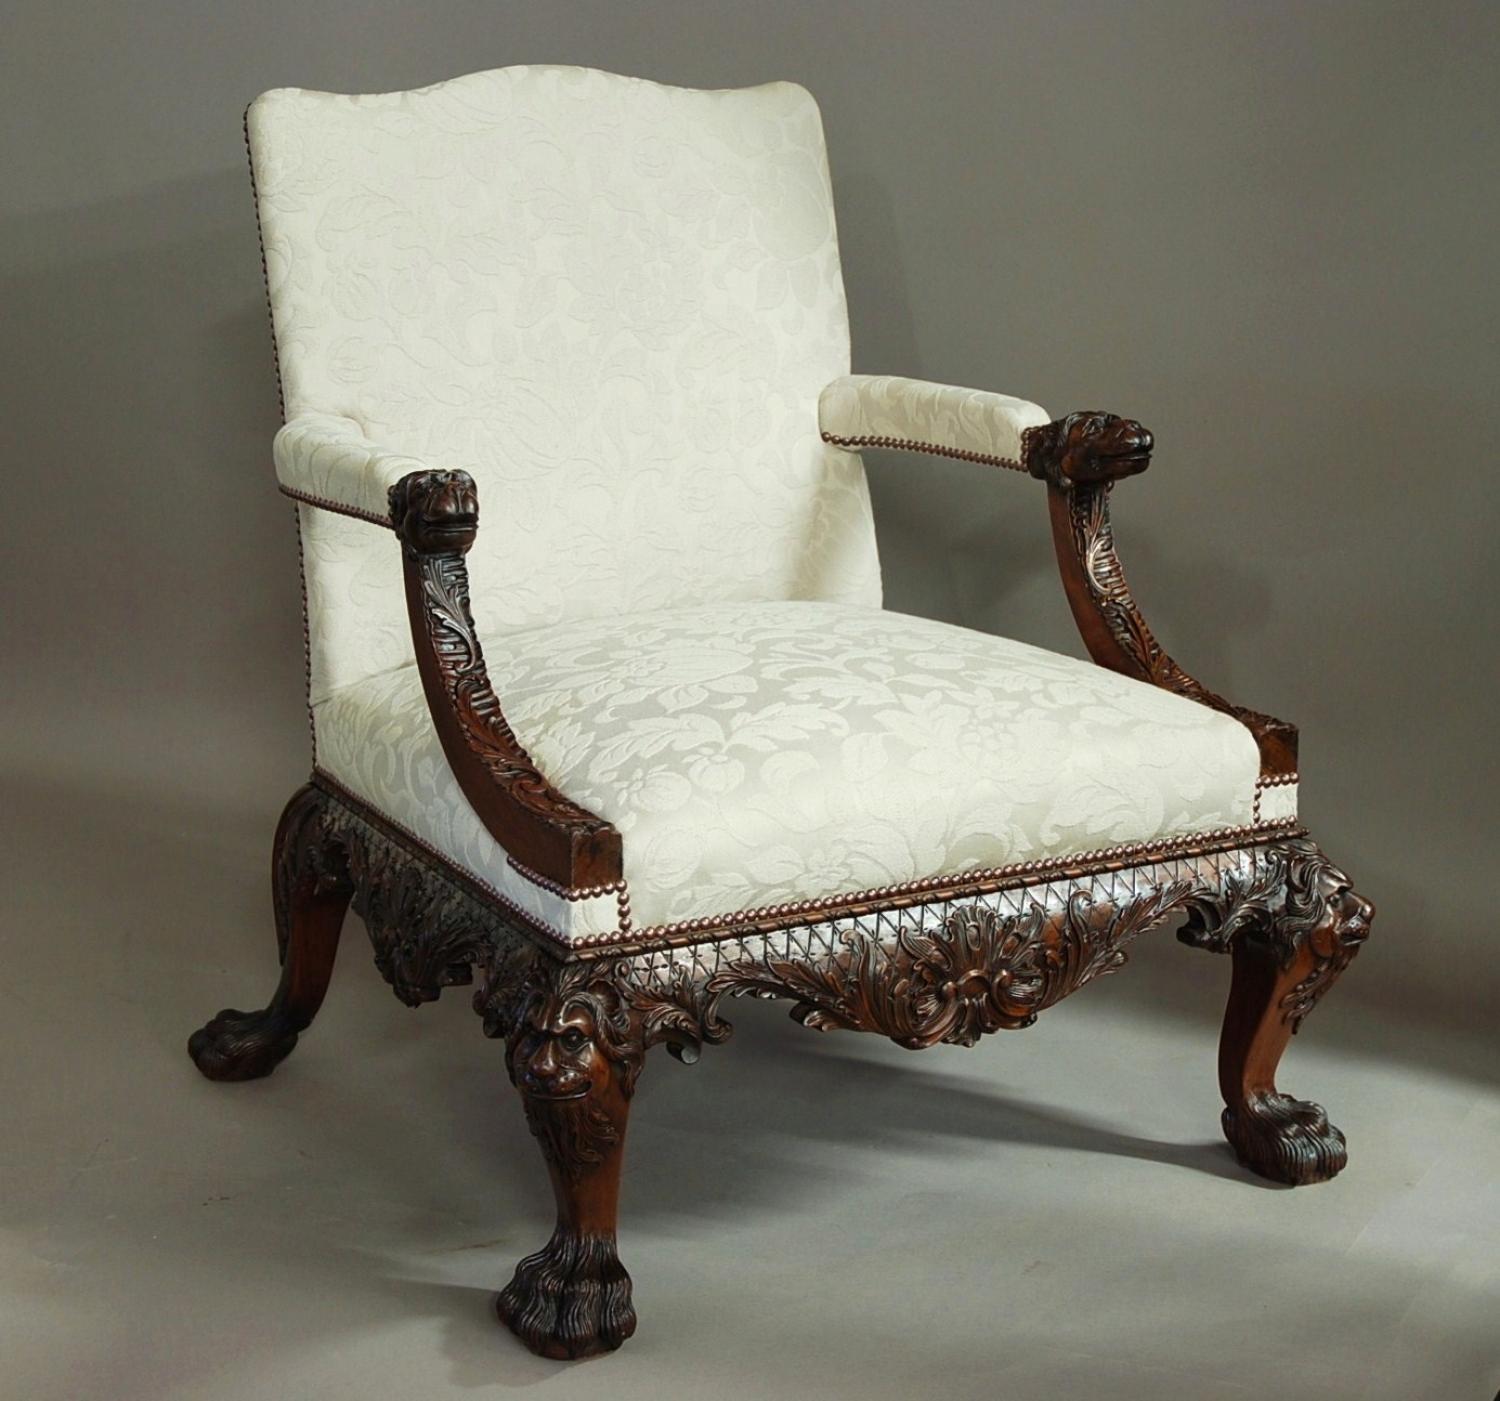 Superb quality Georgian style carved open armchair